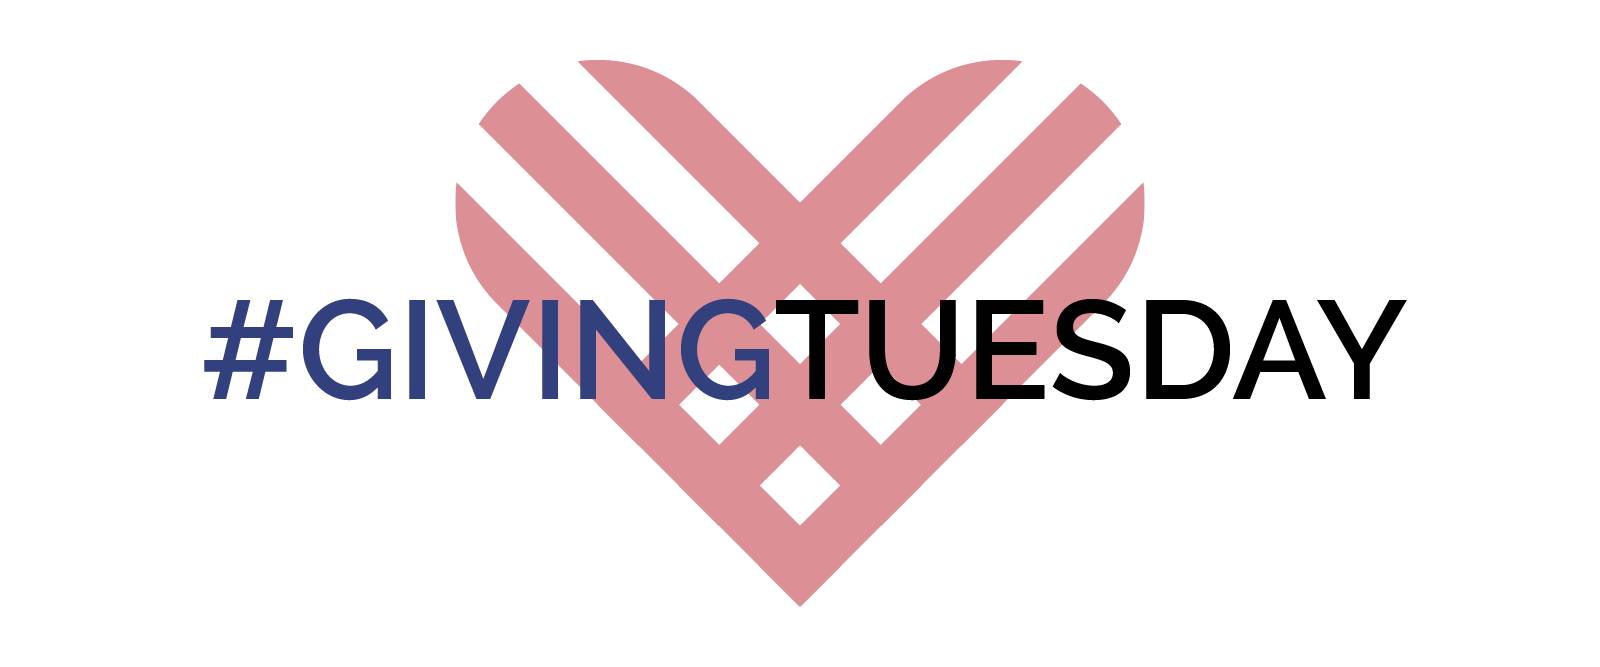 Support the VTC on this Giving Tuesday!